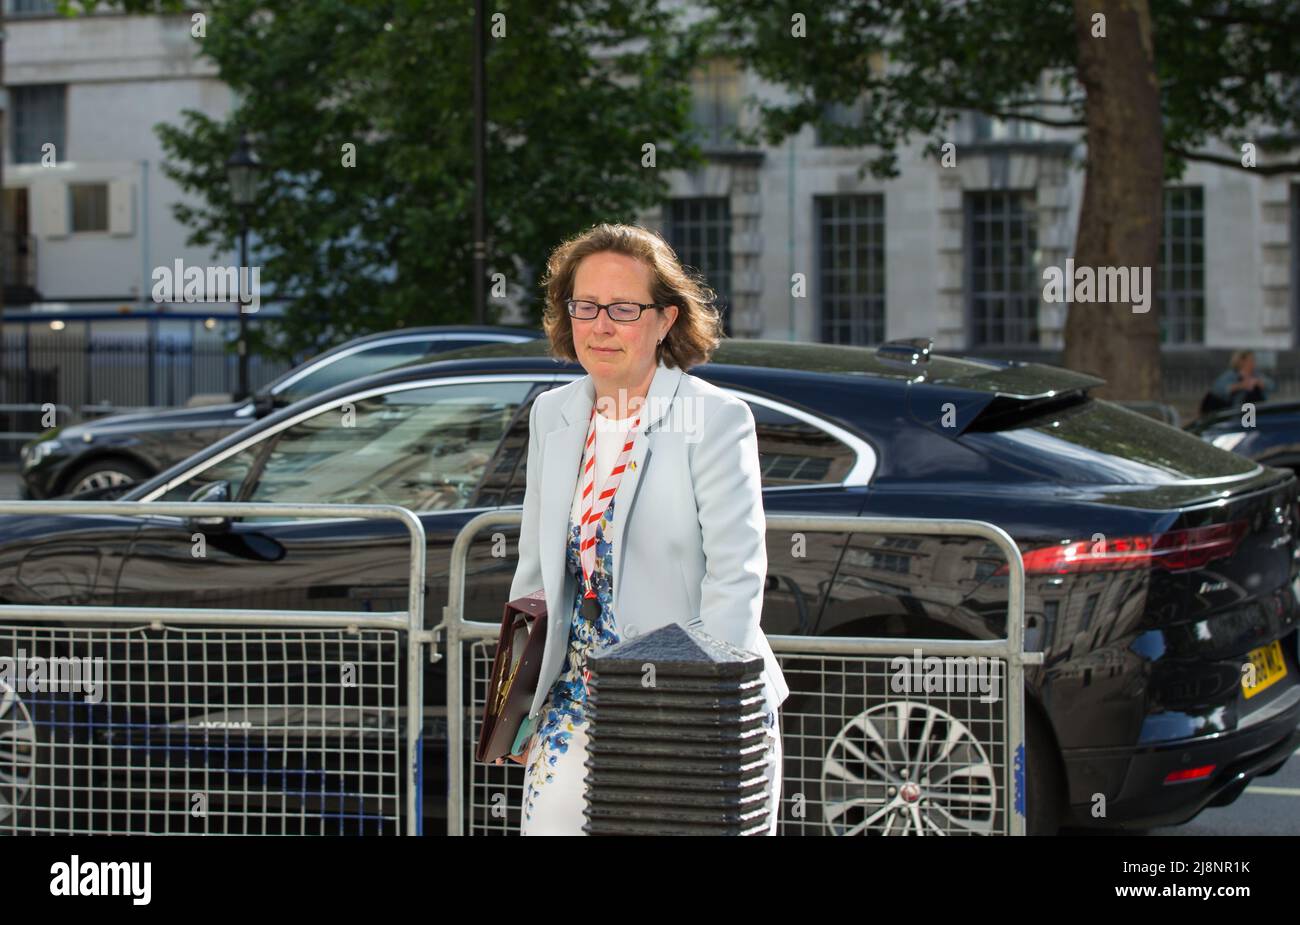 London uk Baroness Evans of Bowes Park Leader of the House of Lords Arriving at cabinet office Stock Photo